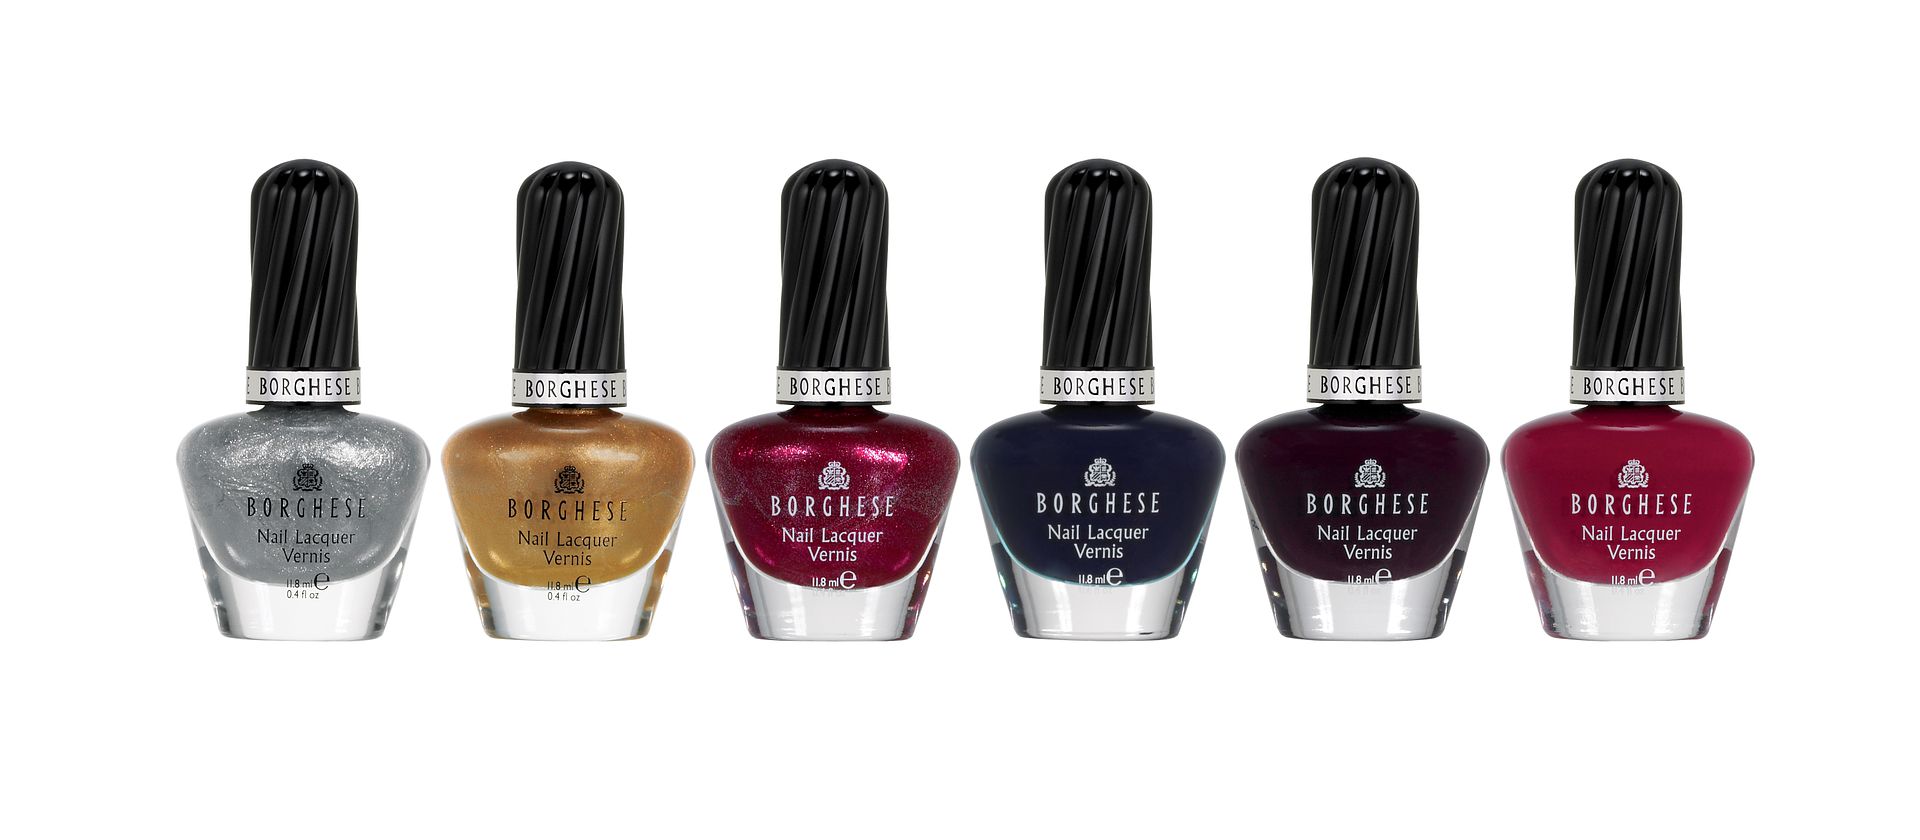 Next up--Borghese Nail Lacquers have debuted their cute little Holiday Mini 